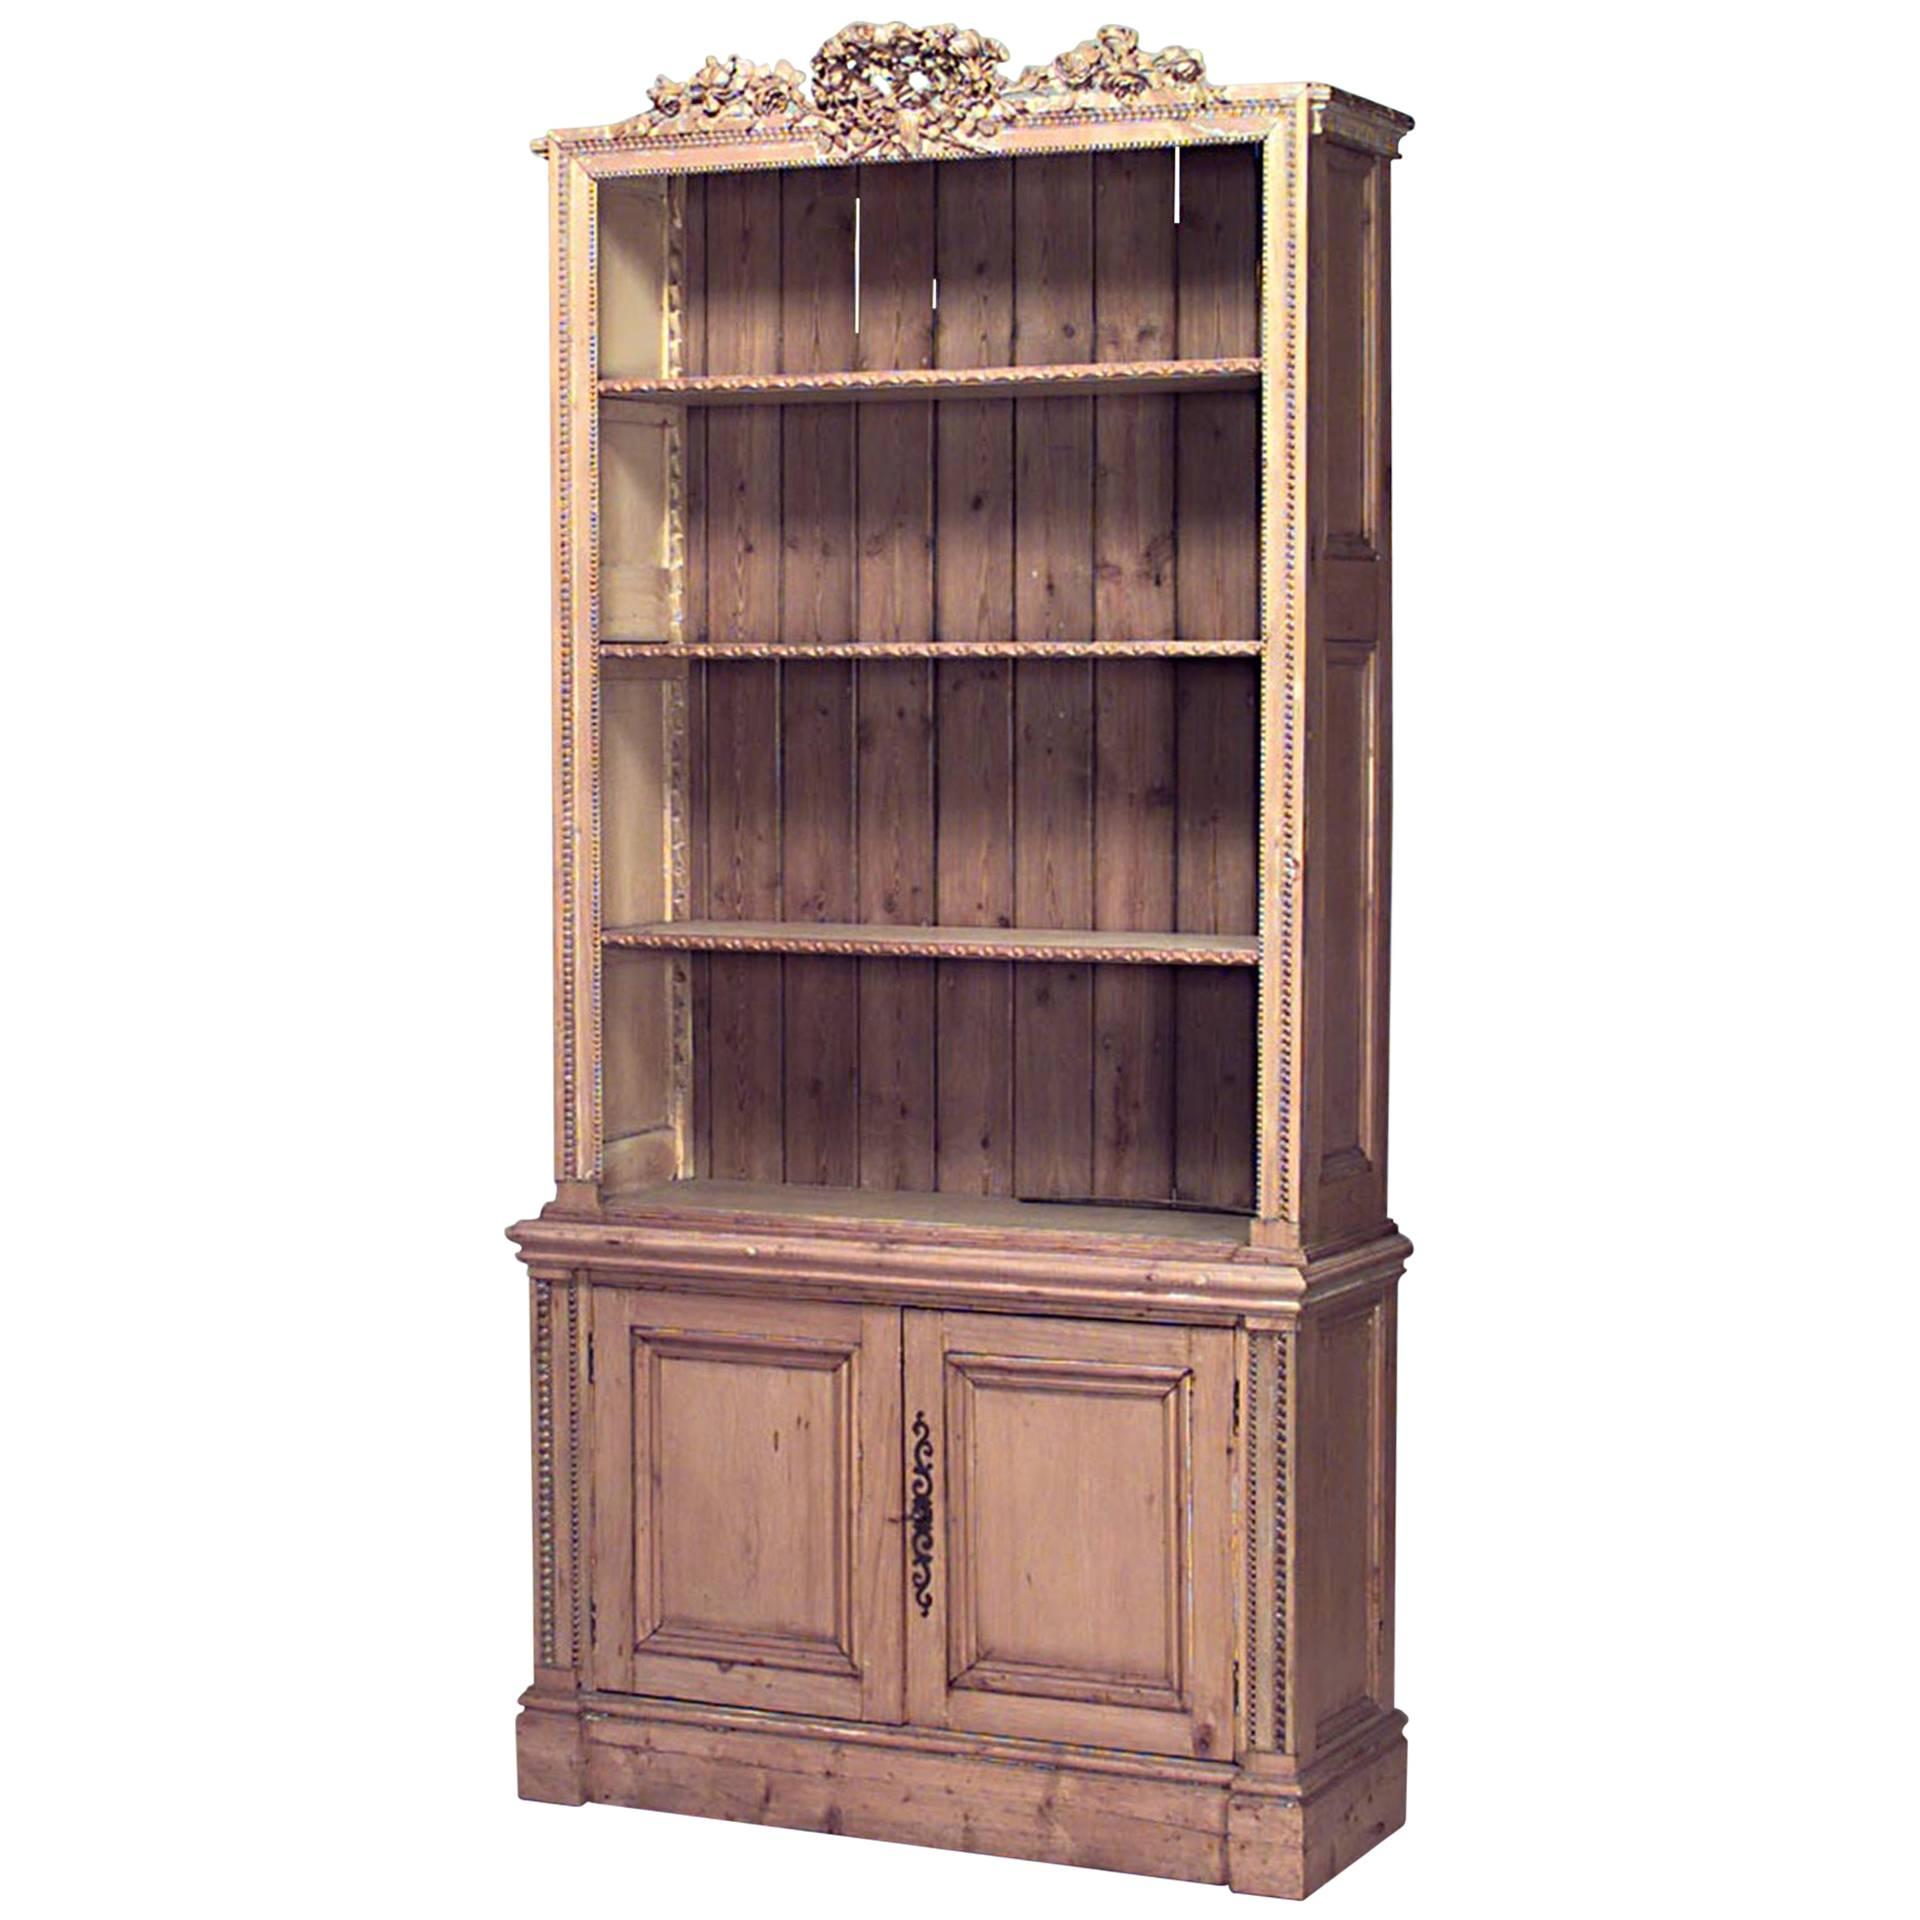 English Country Stripped Pine Floral Bookcase